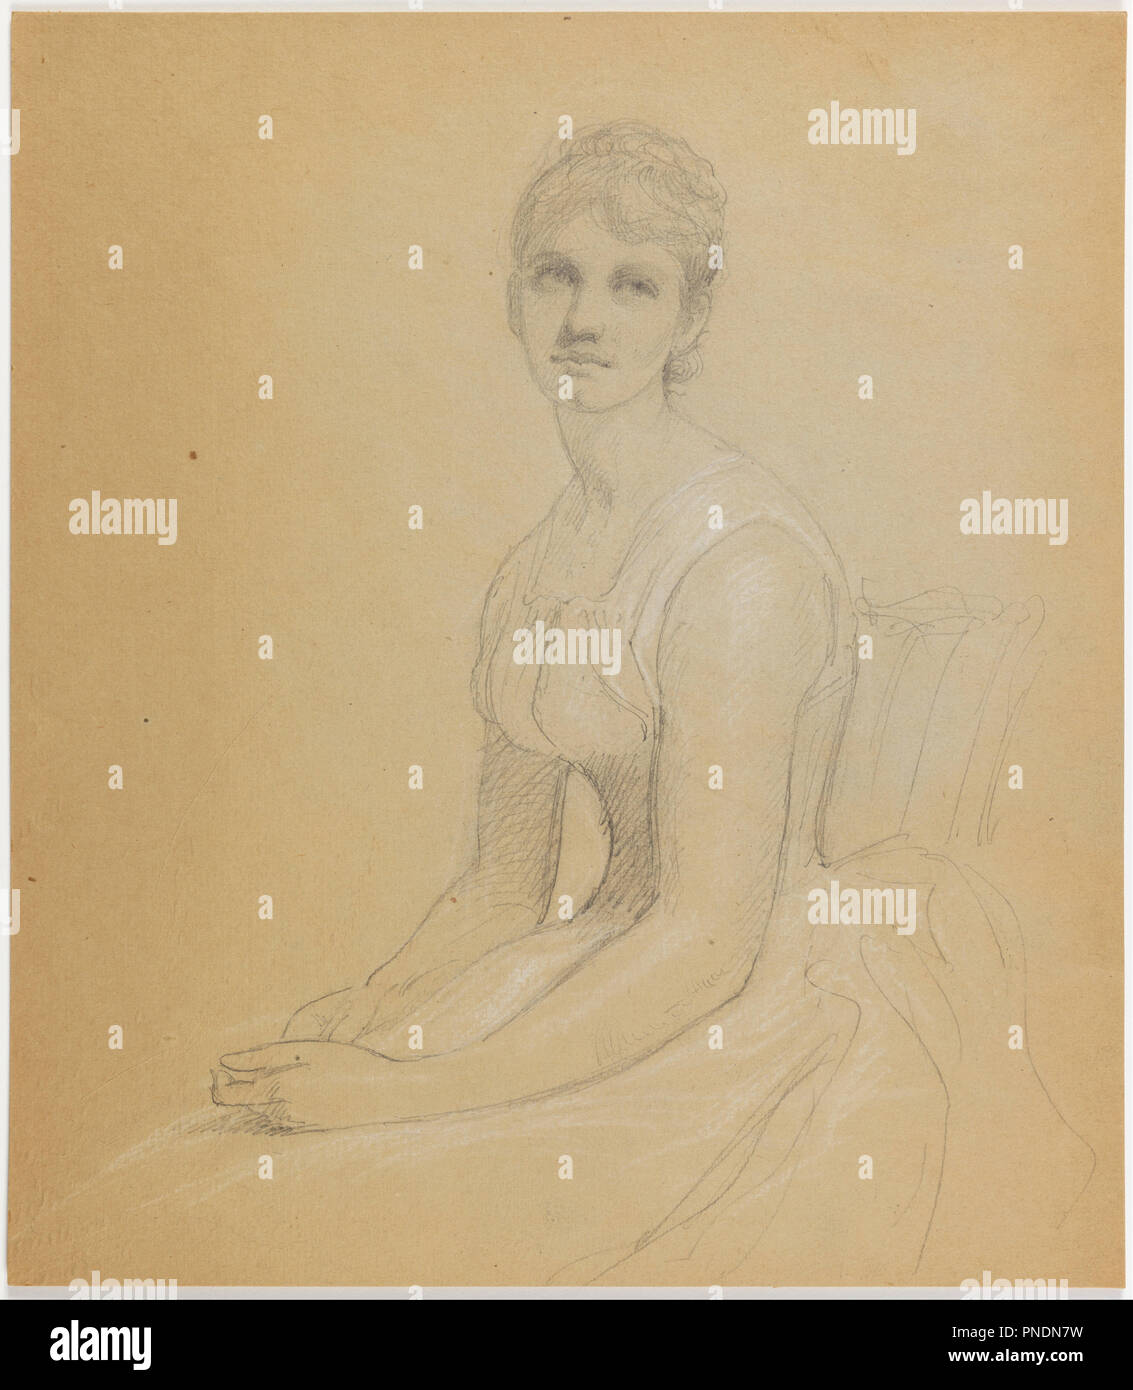 Sketch for Portrait of a Woman. Date/Period: 1881. Drawing. Graphite and white chalk on thick cream wove paper. Author: DANIEL HUNTINGTON. Stock Photo